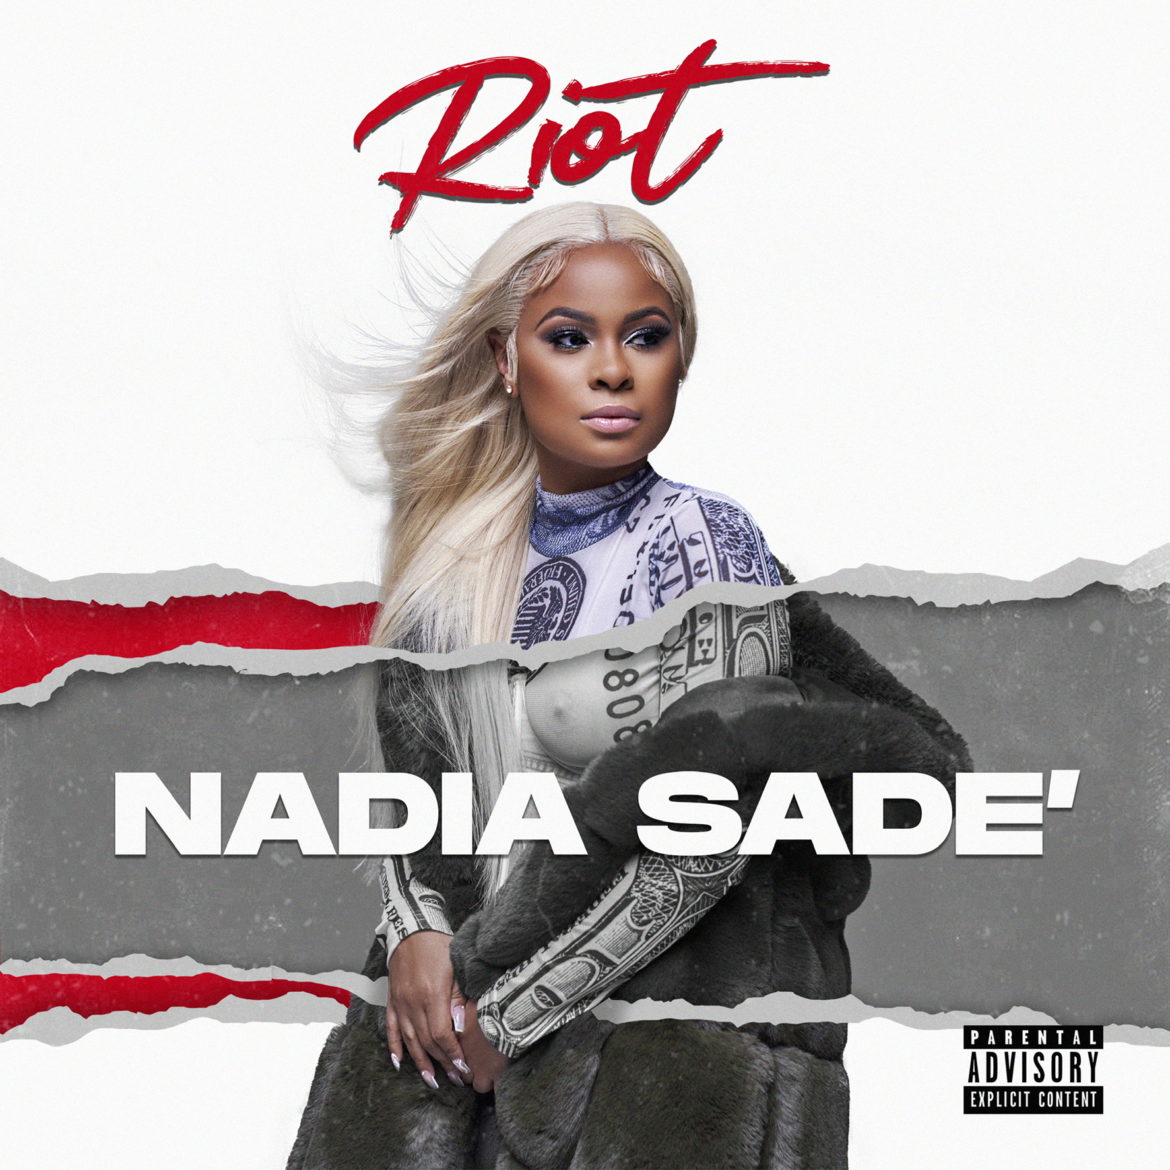 Nadia Sade’s New Single, ‘Riot’ Officially Scheduled For Release